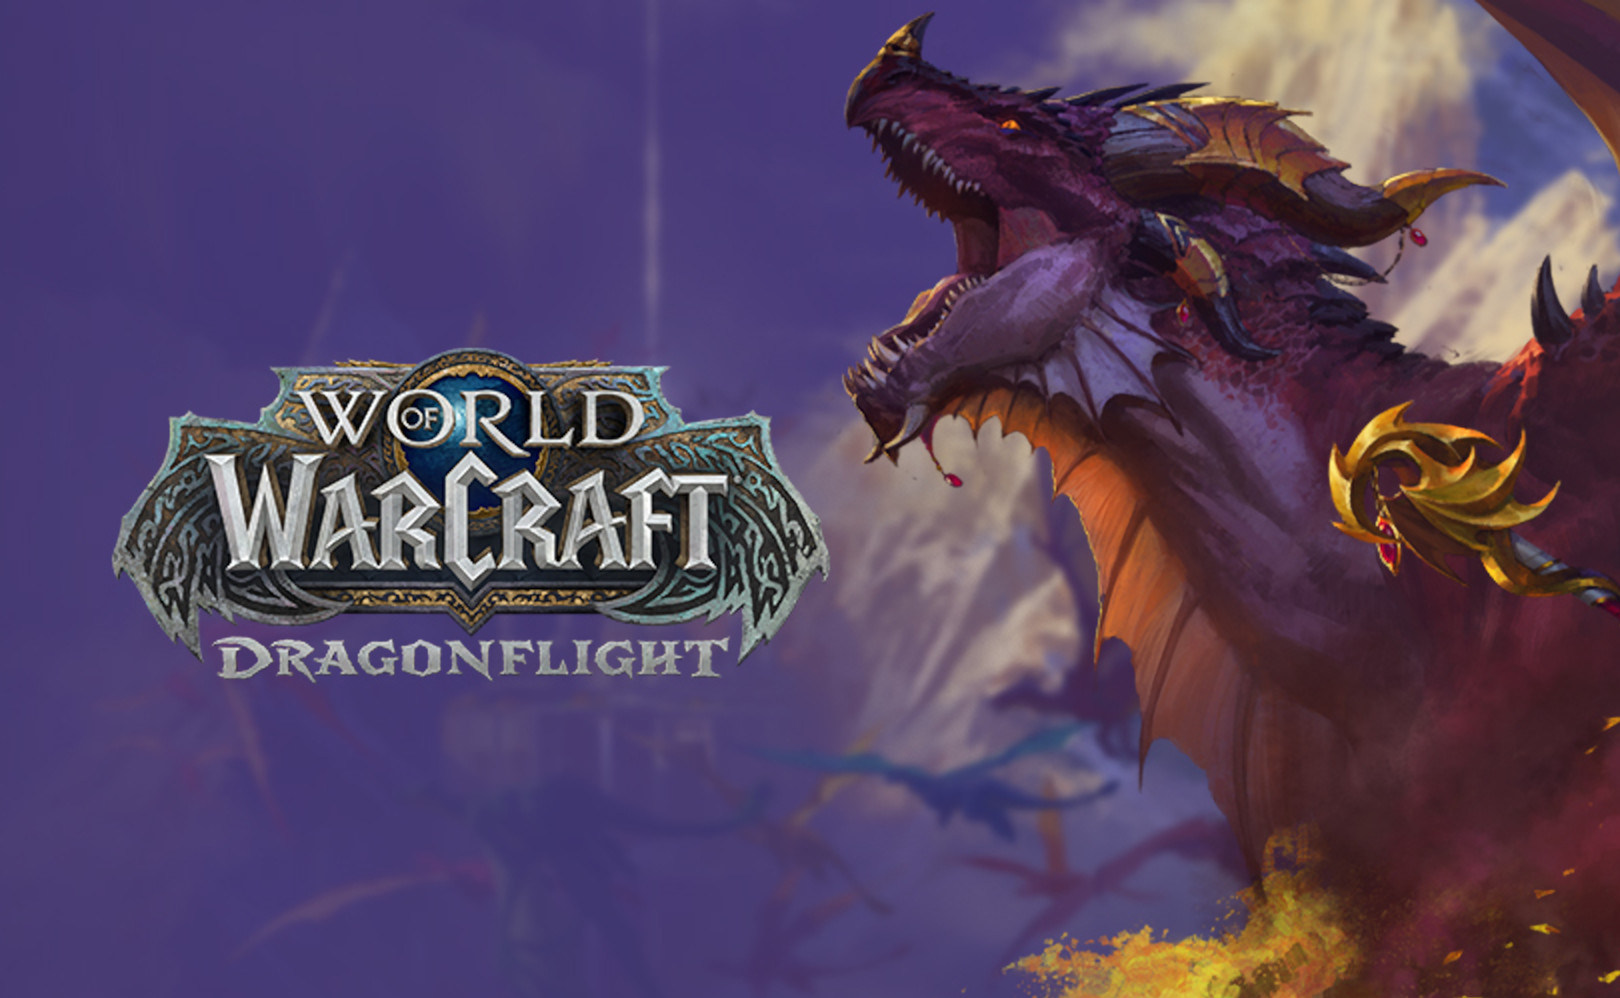 ⭐️[Dragonflight] Leveling/Mythic/Keys/Arena/Raids - ask me about any service you need⭐️